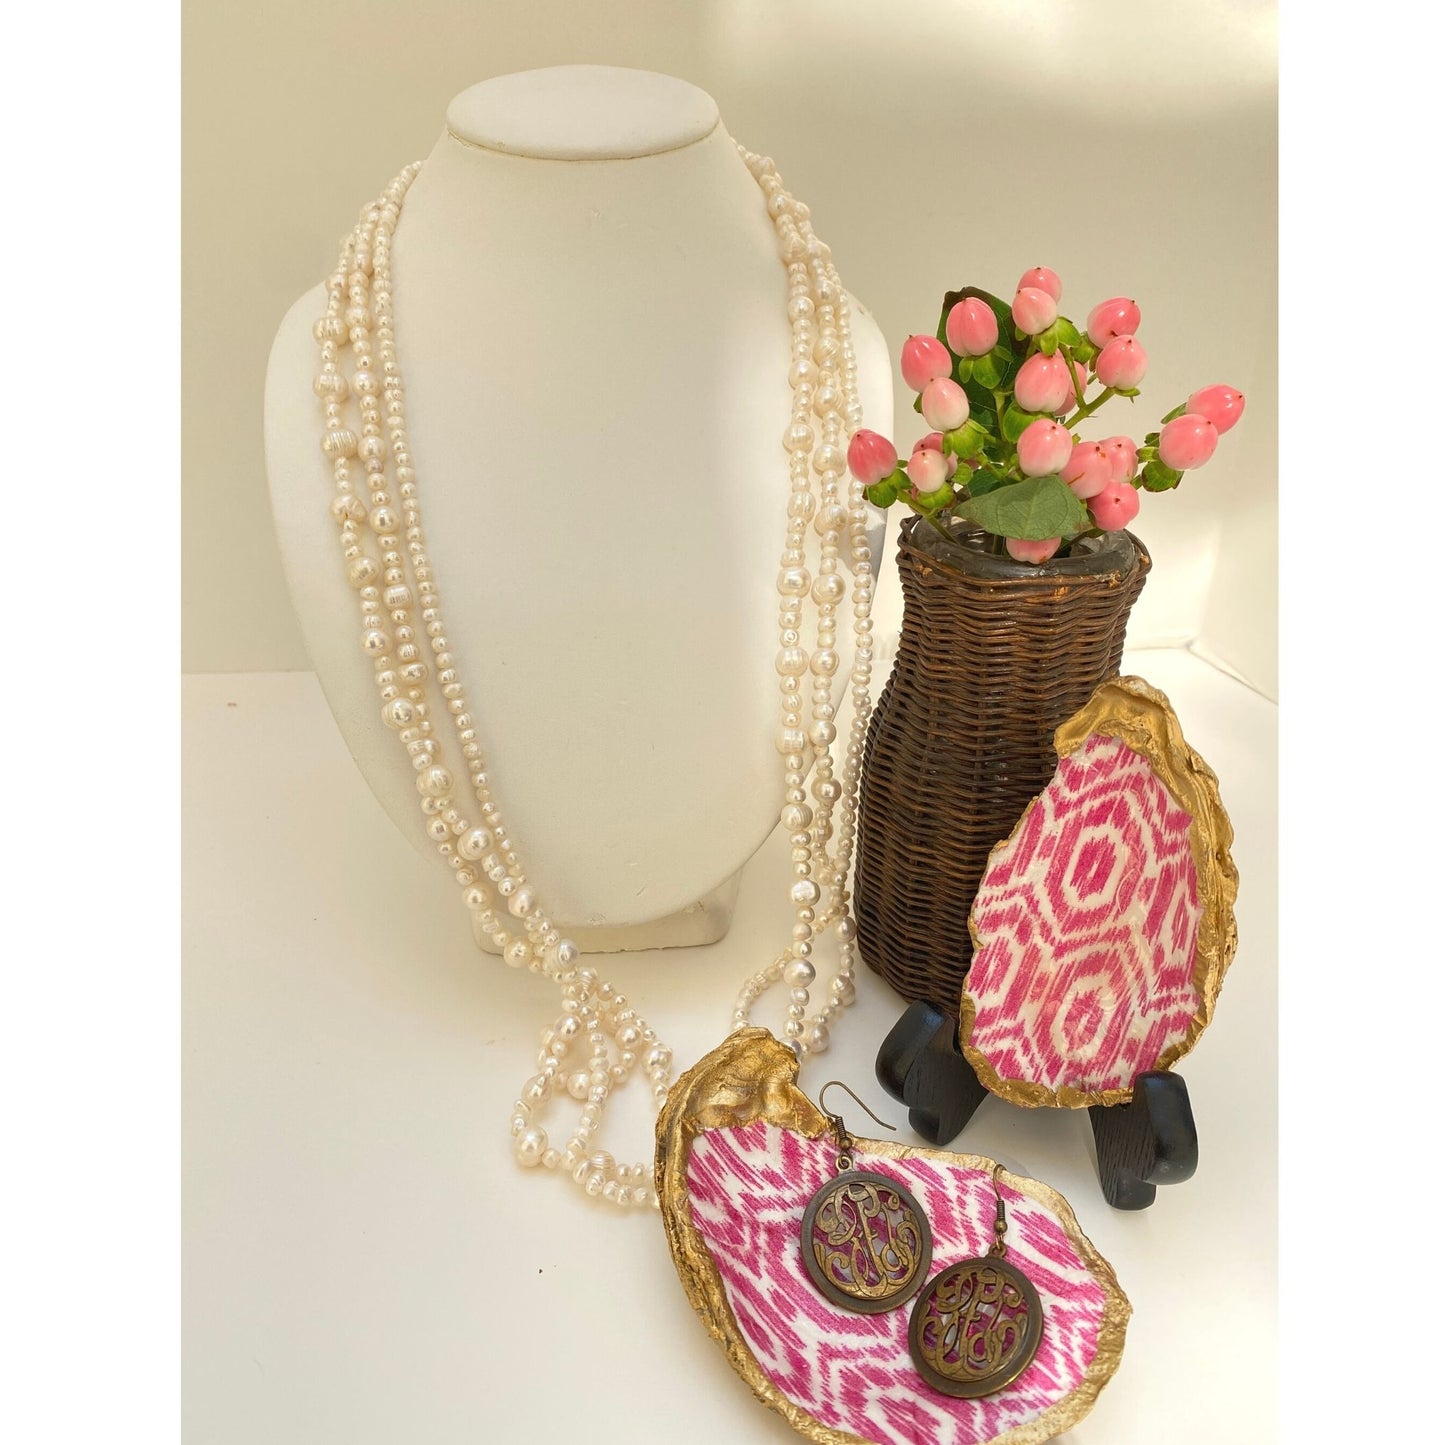 Mother of Pearl Necklace | Three Strand | 30th Pearl Anniversary Gift